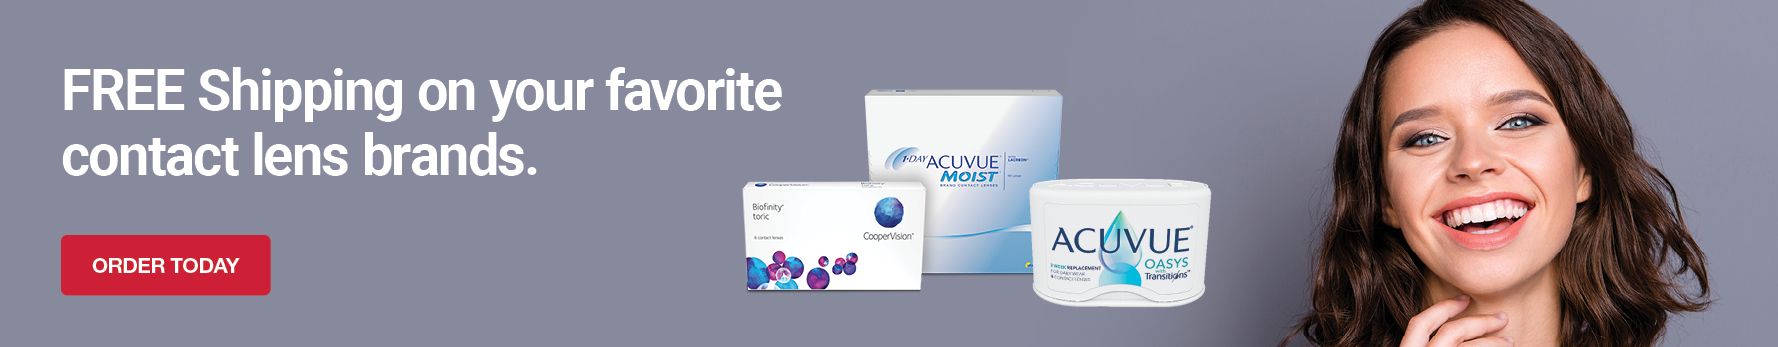 Free shipping on your favorite contact lens brands. Shop now.